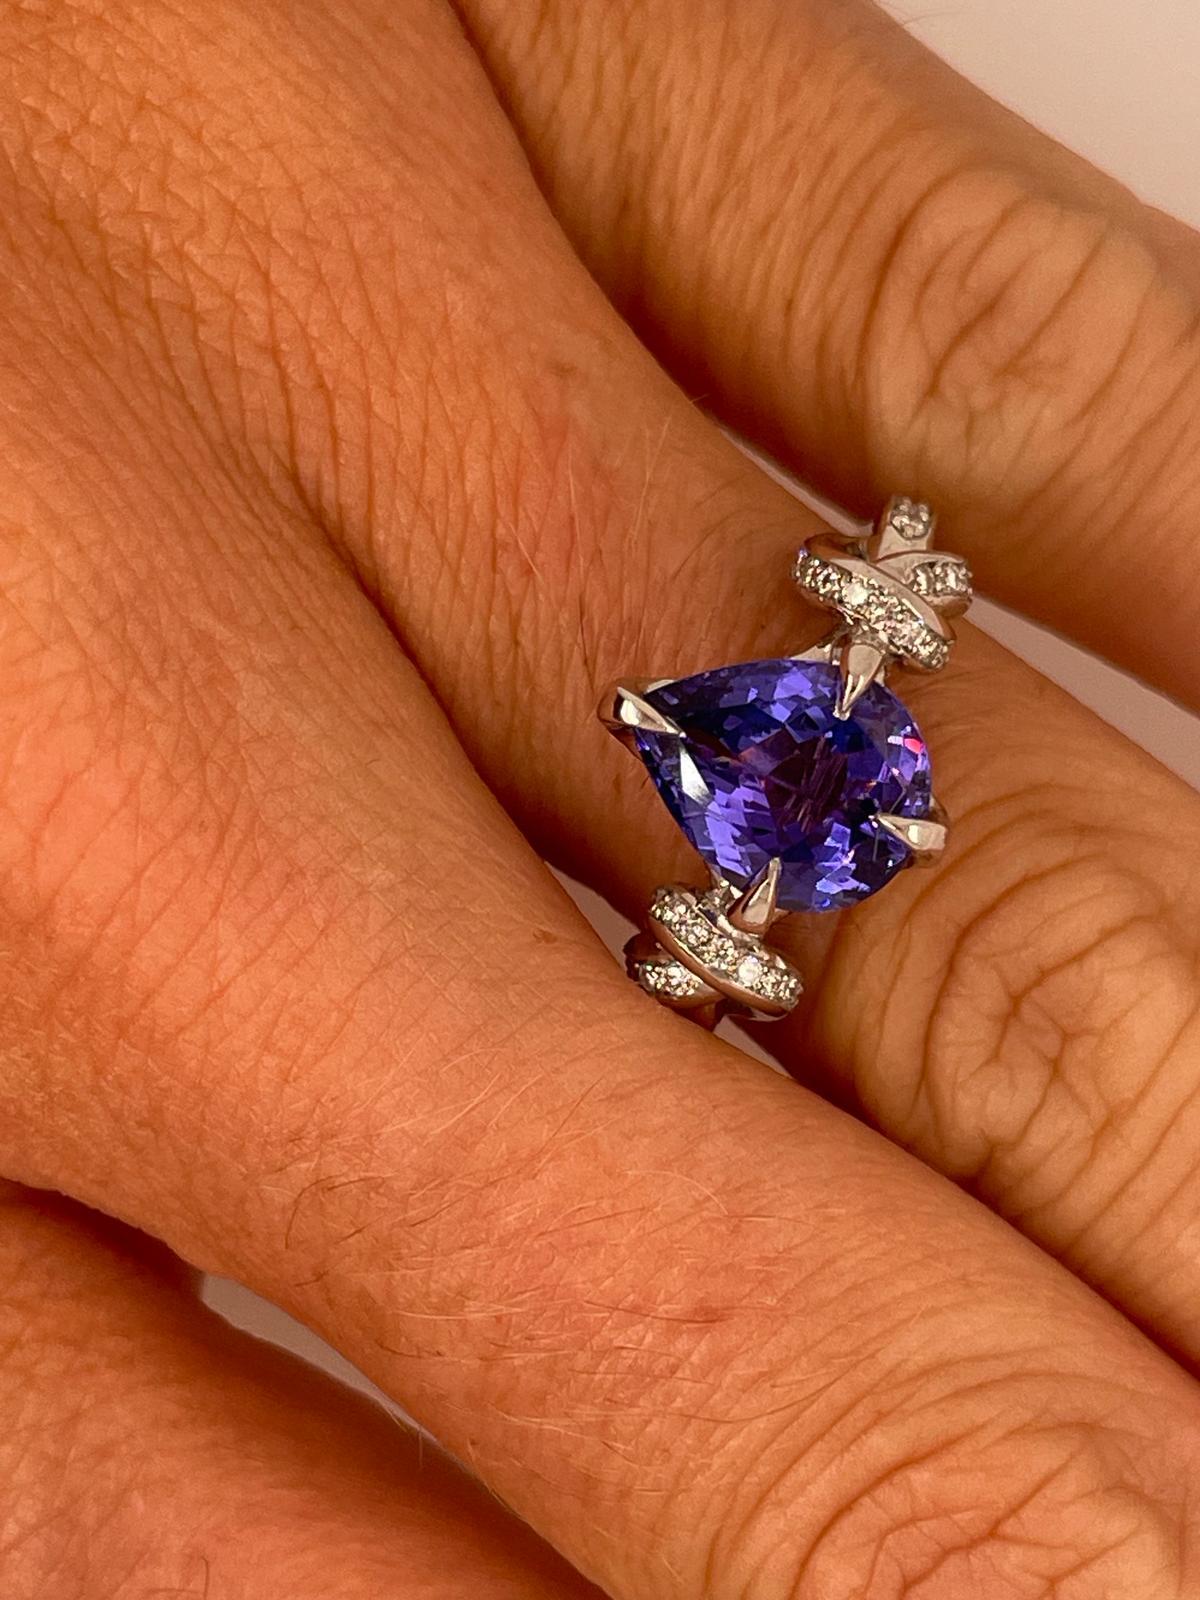 For Sale:  2ct tanzanite and diamond ring in platinum and rose gold  Forget me knot ring  11